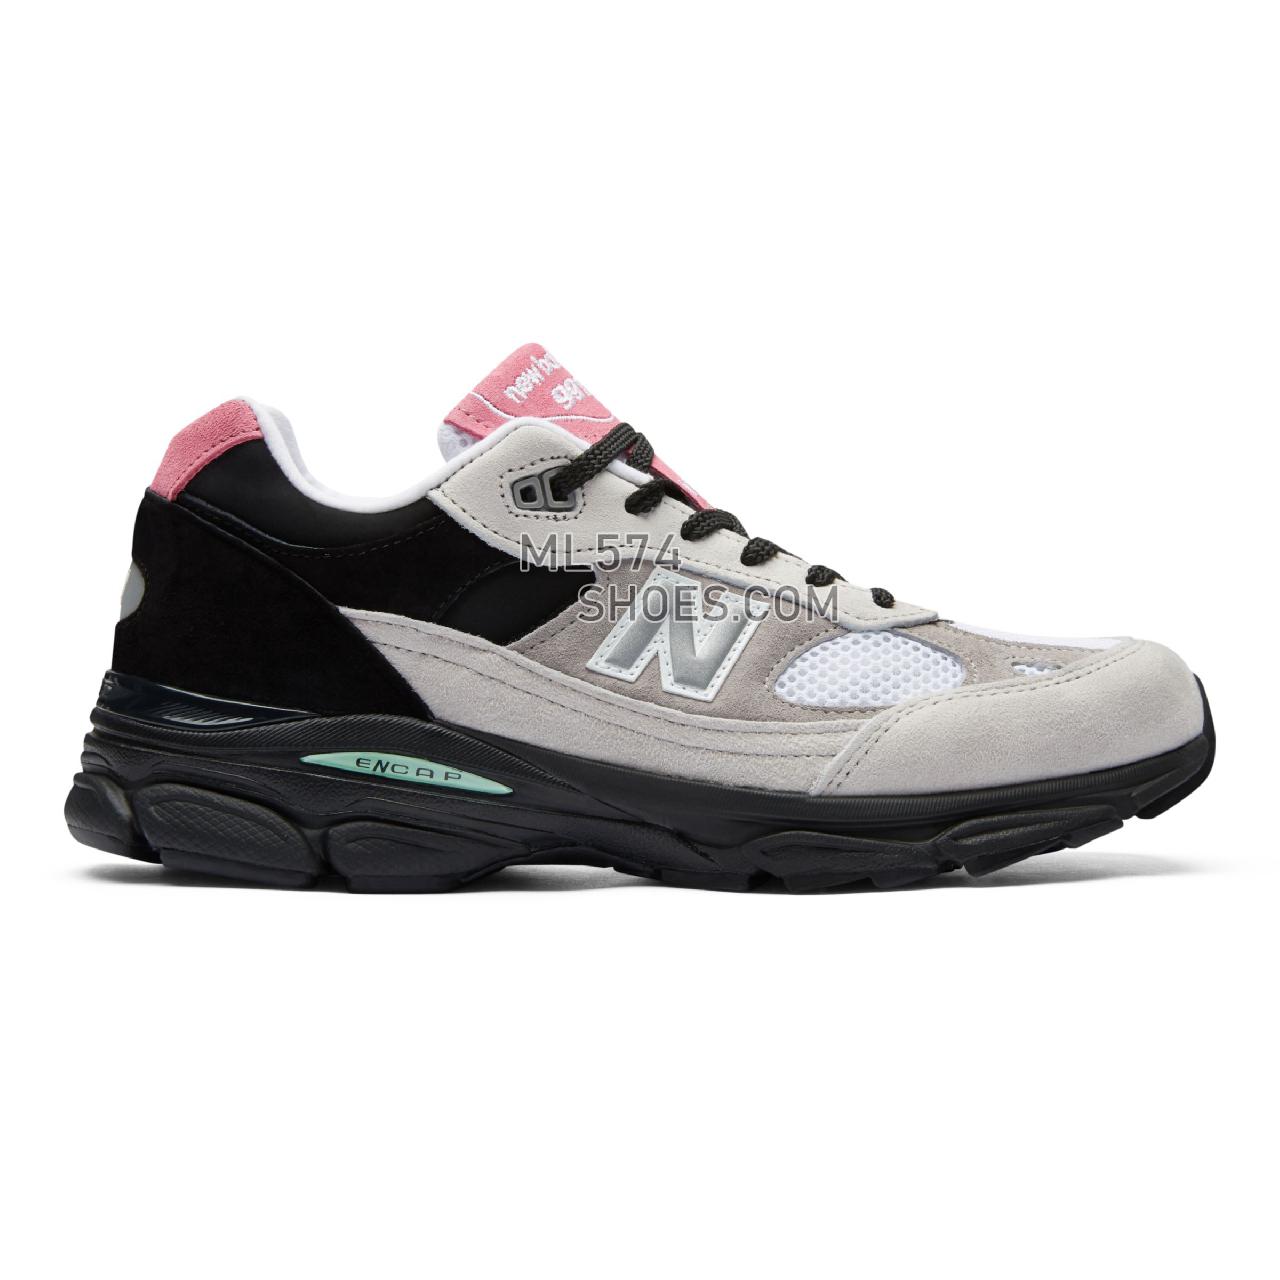 New Balance Made in UK 991.9 - Men's Made in UK 991.9 ML9919V1-27793-M - White with Black and Grey - M9919FR